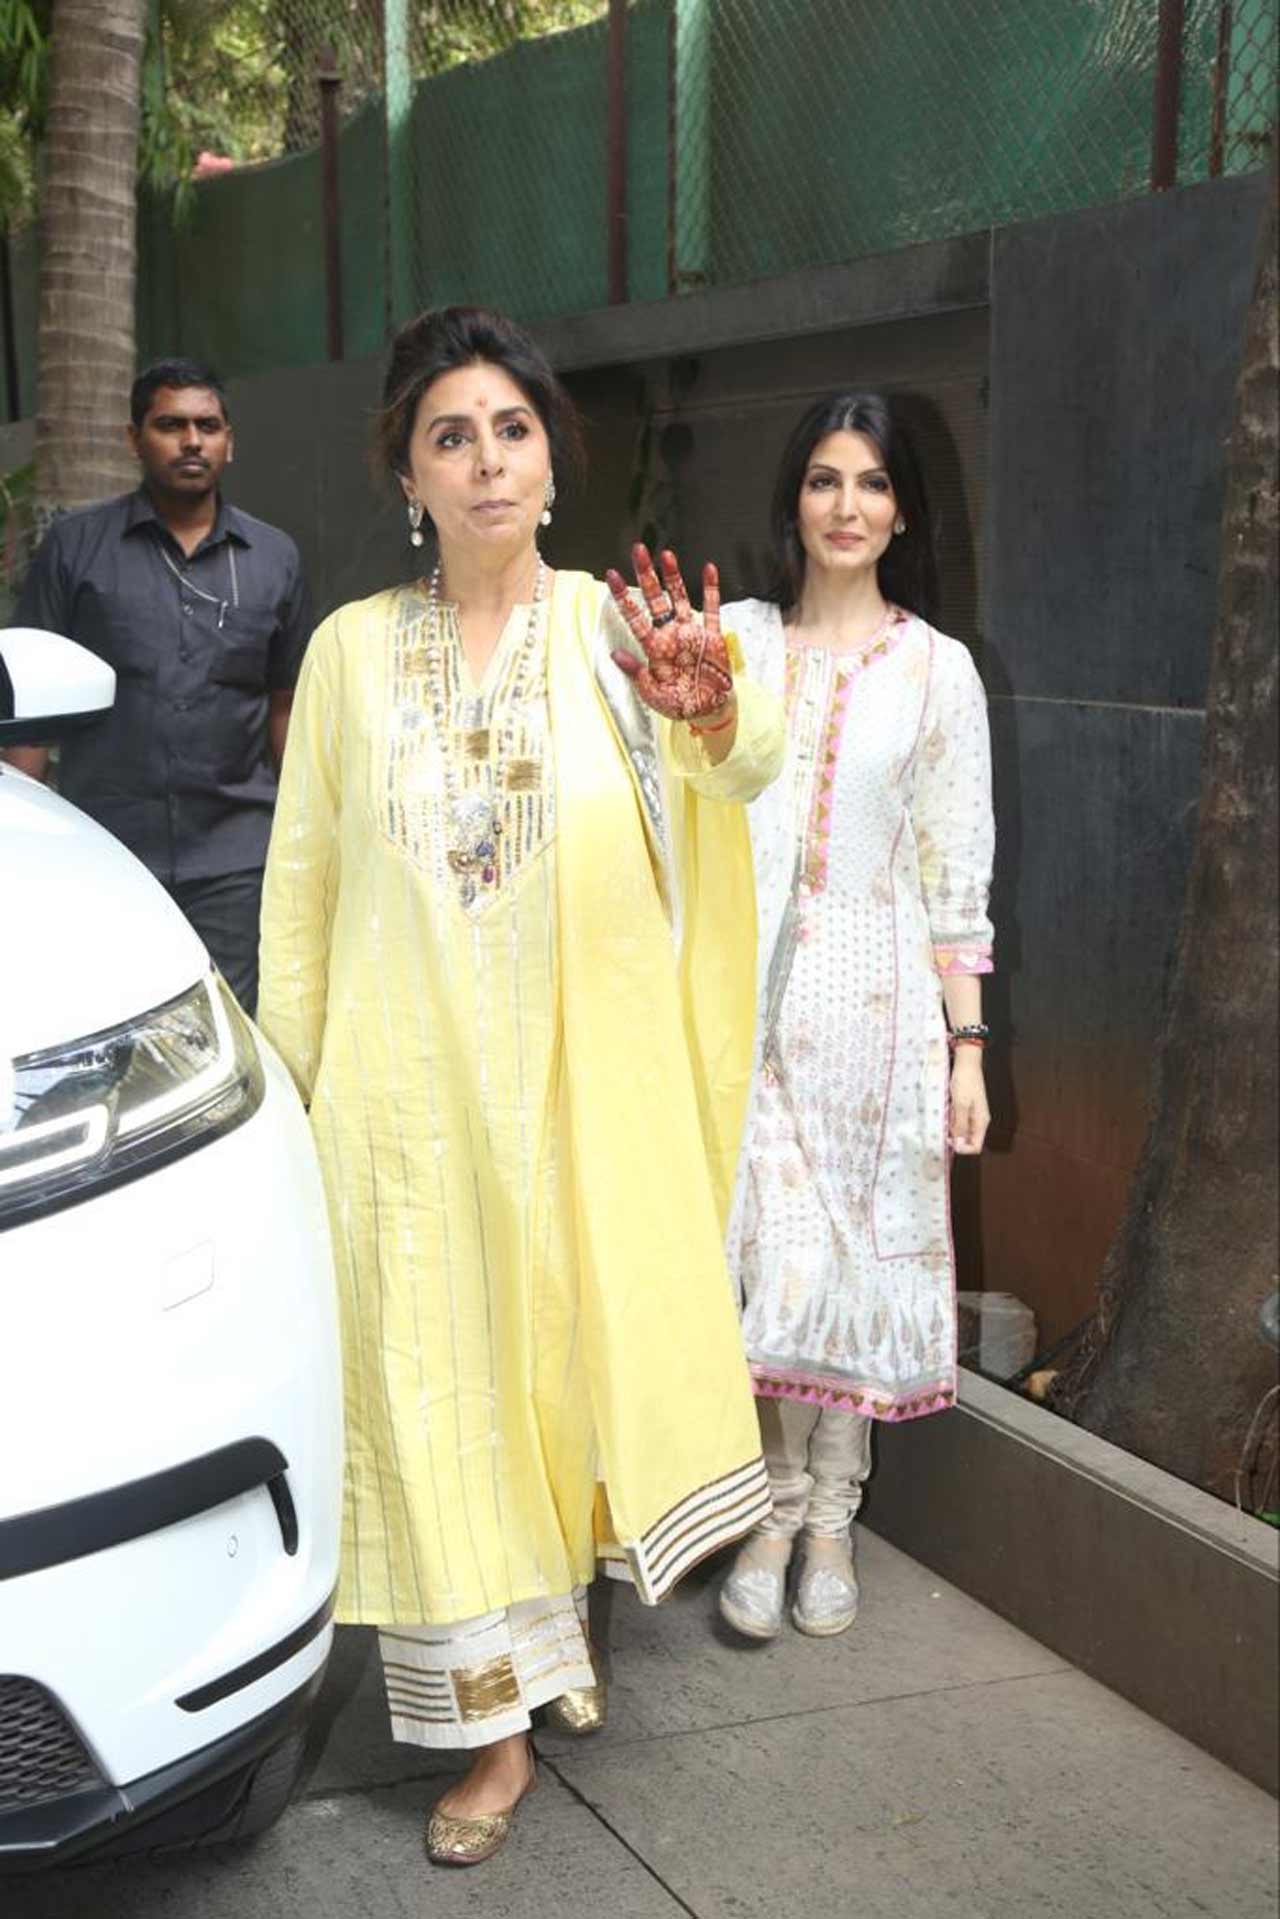 The mother-daughter duo have arrived for the Haldi ceremony which is set to be held today at Ranbir's Bandra residence, Vastu, which will also be the venue for the couple's wedding today.